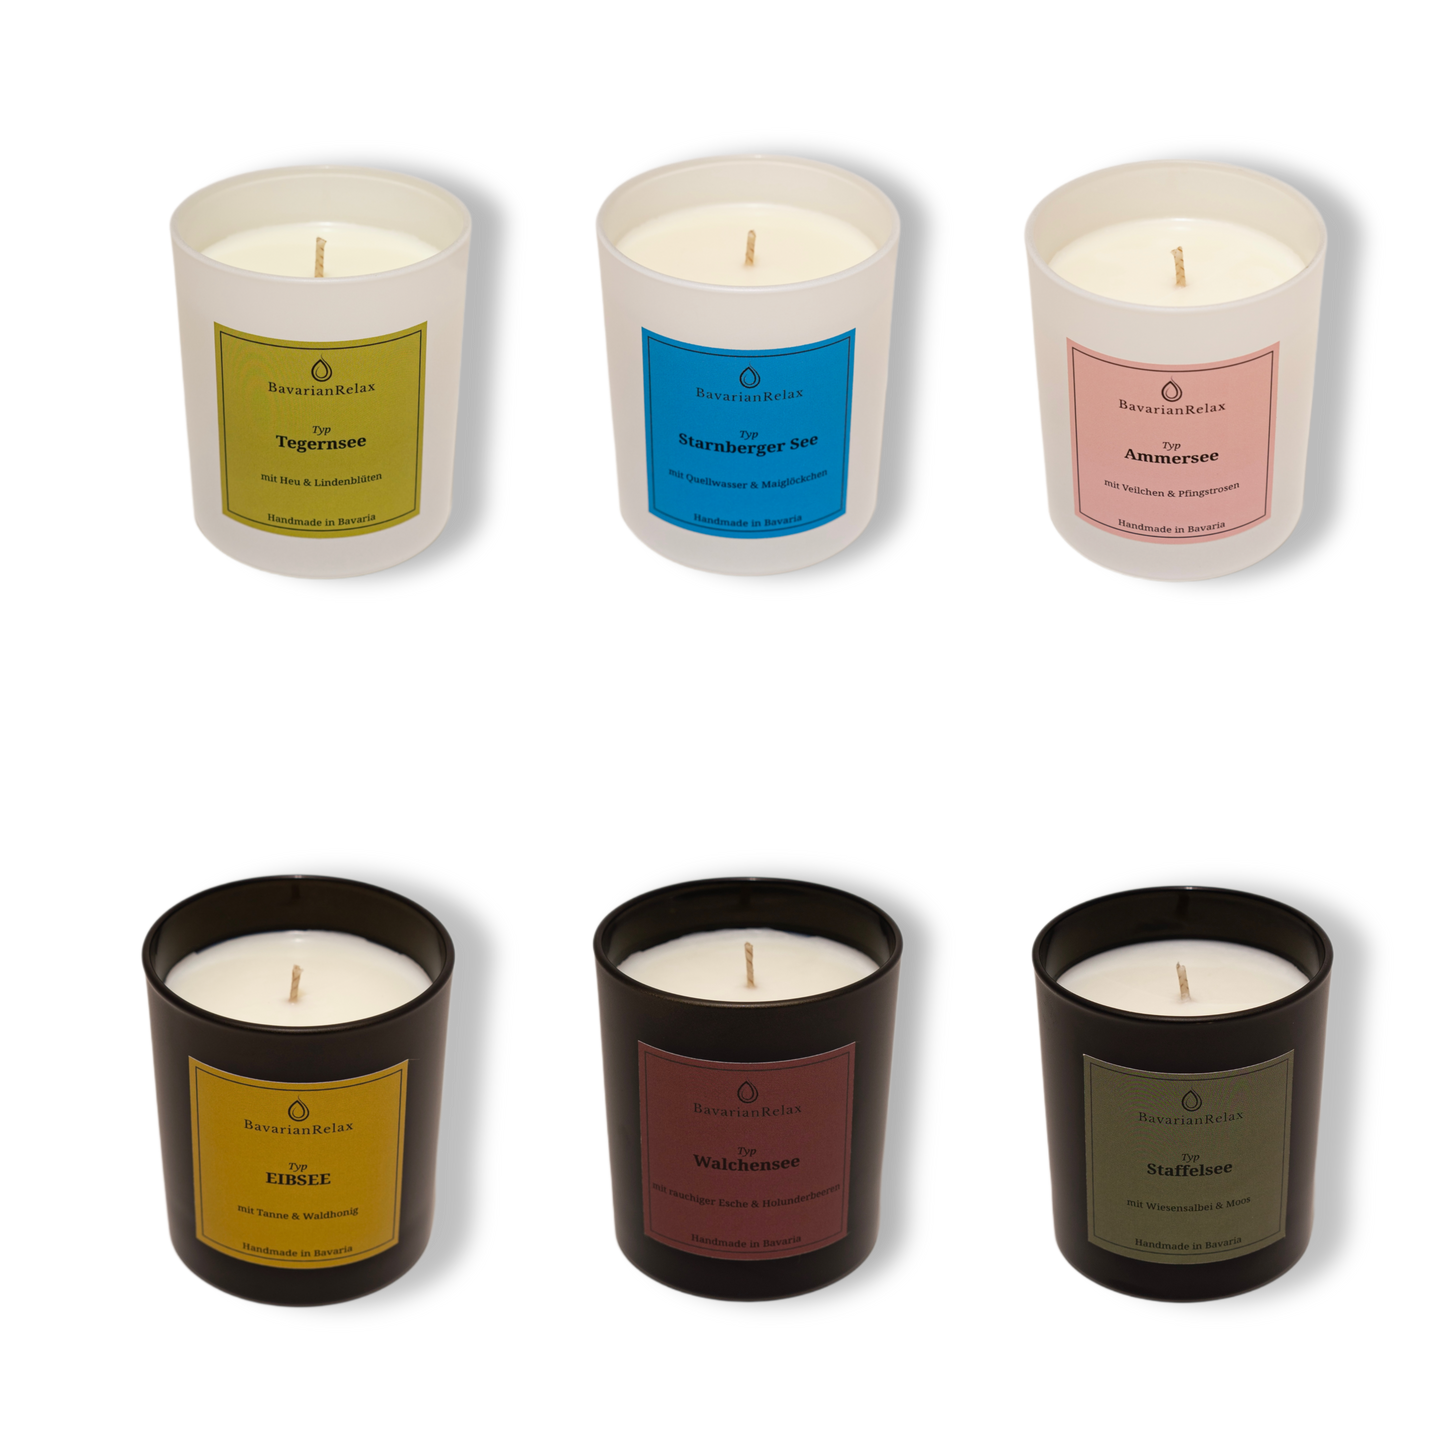 Large fragrance collection cotton wick - 6 pieces of large scented candles 6x200g